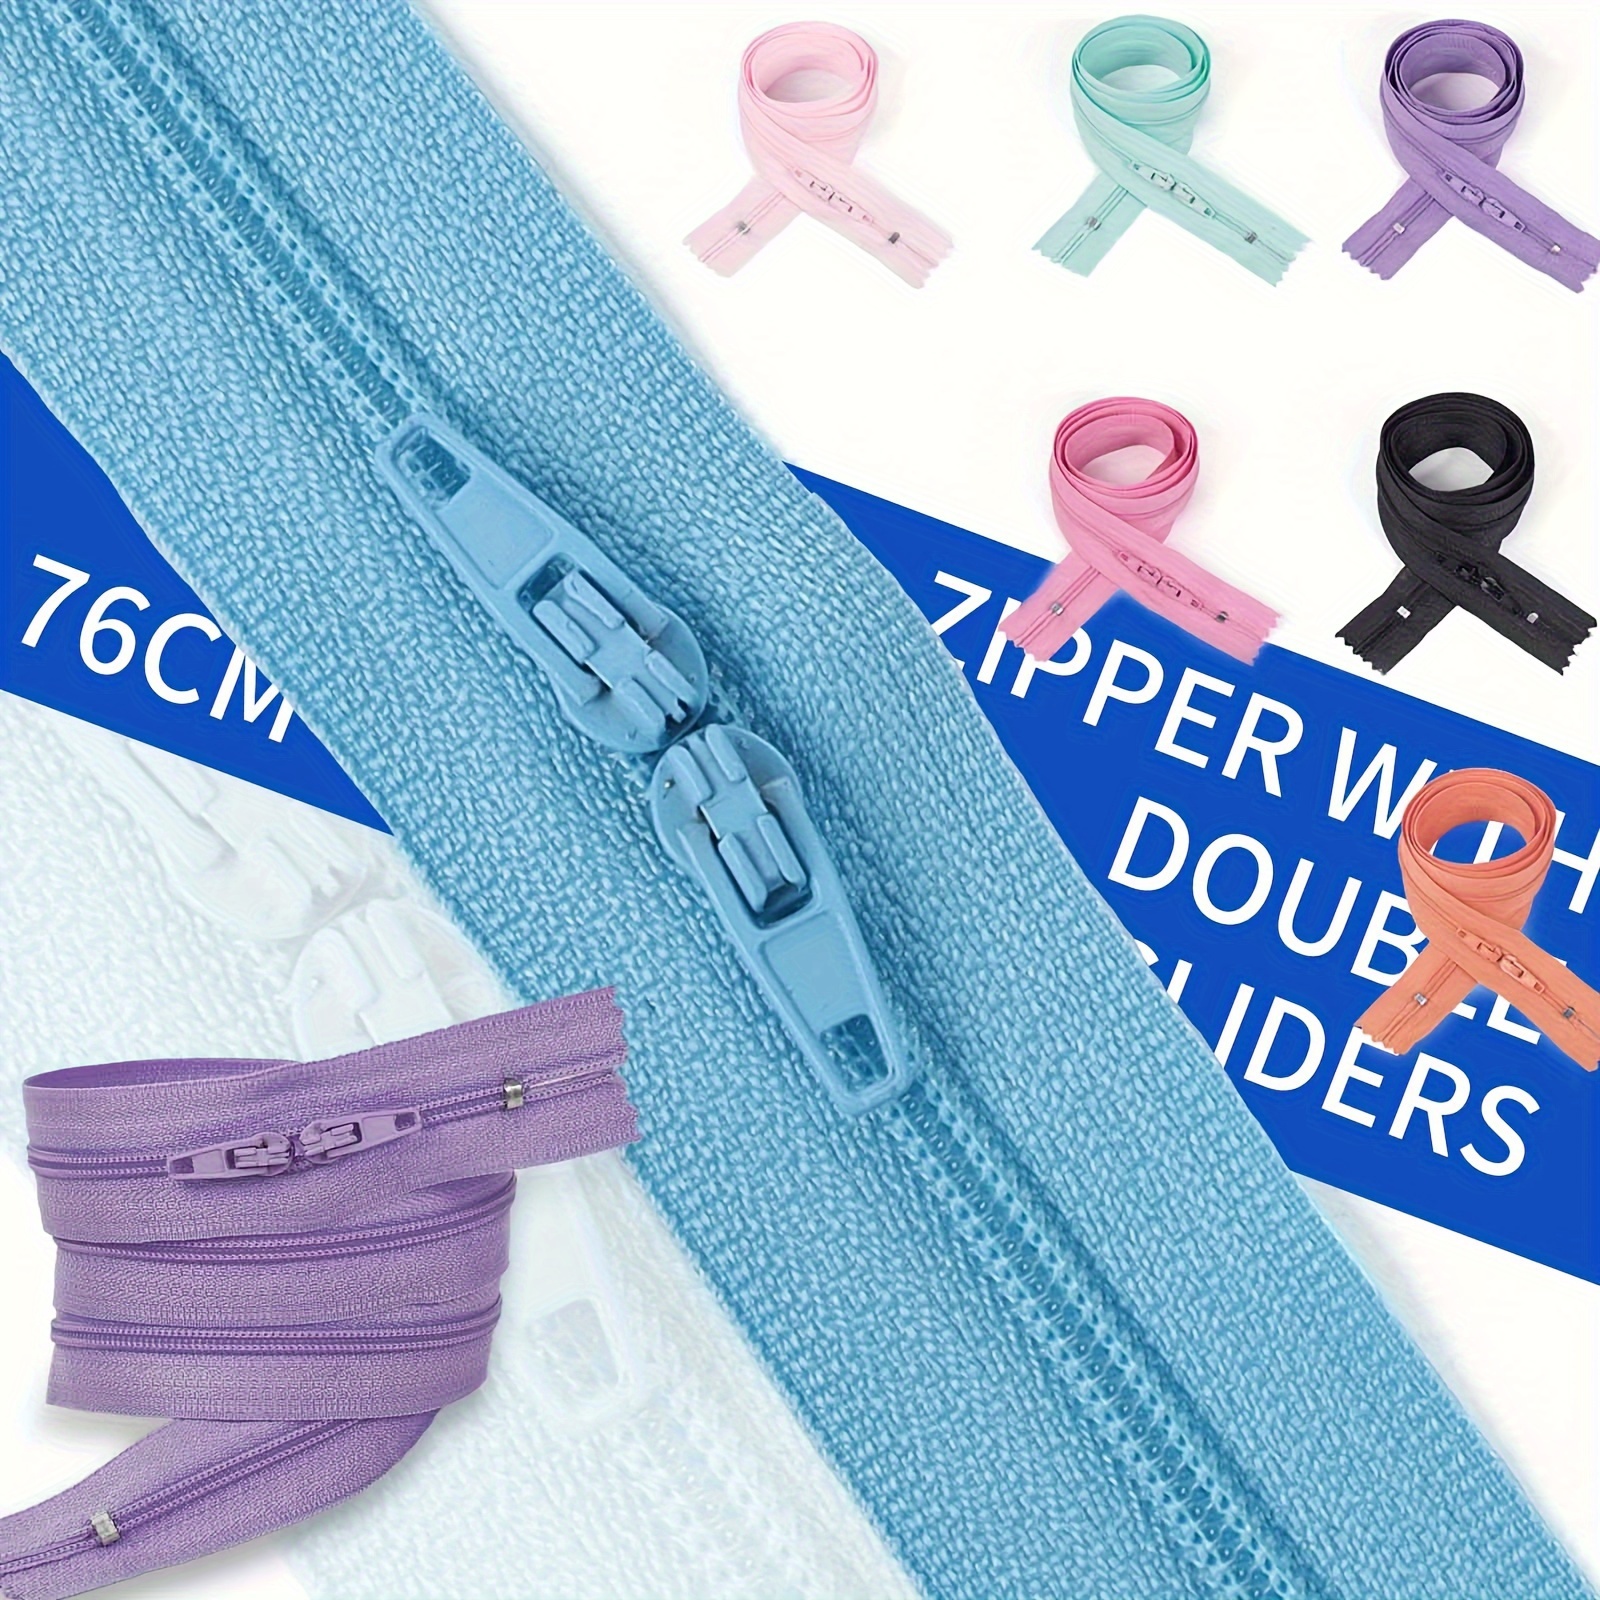 

multi-color Options" #3 Double-ended Nylon Zippers With Closed Tails, Secure Locking For Bags, Pillows & Quilt Covers - Available In Orange-red, Lavender, Aqua, Magenta, Pink, Blue, Black